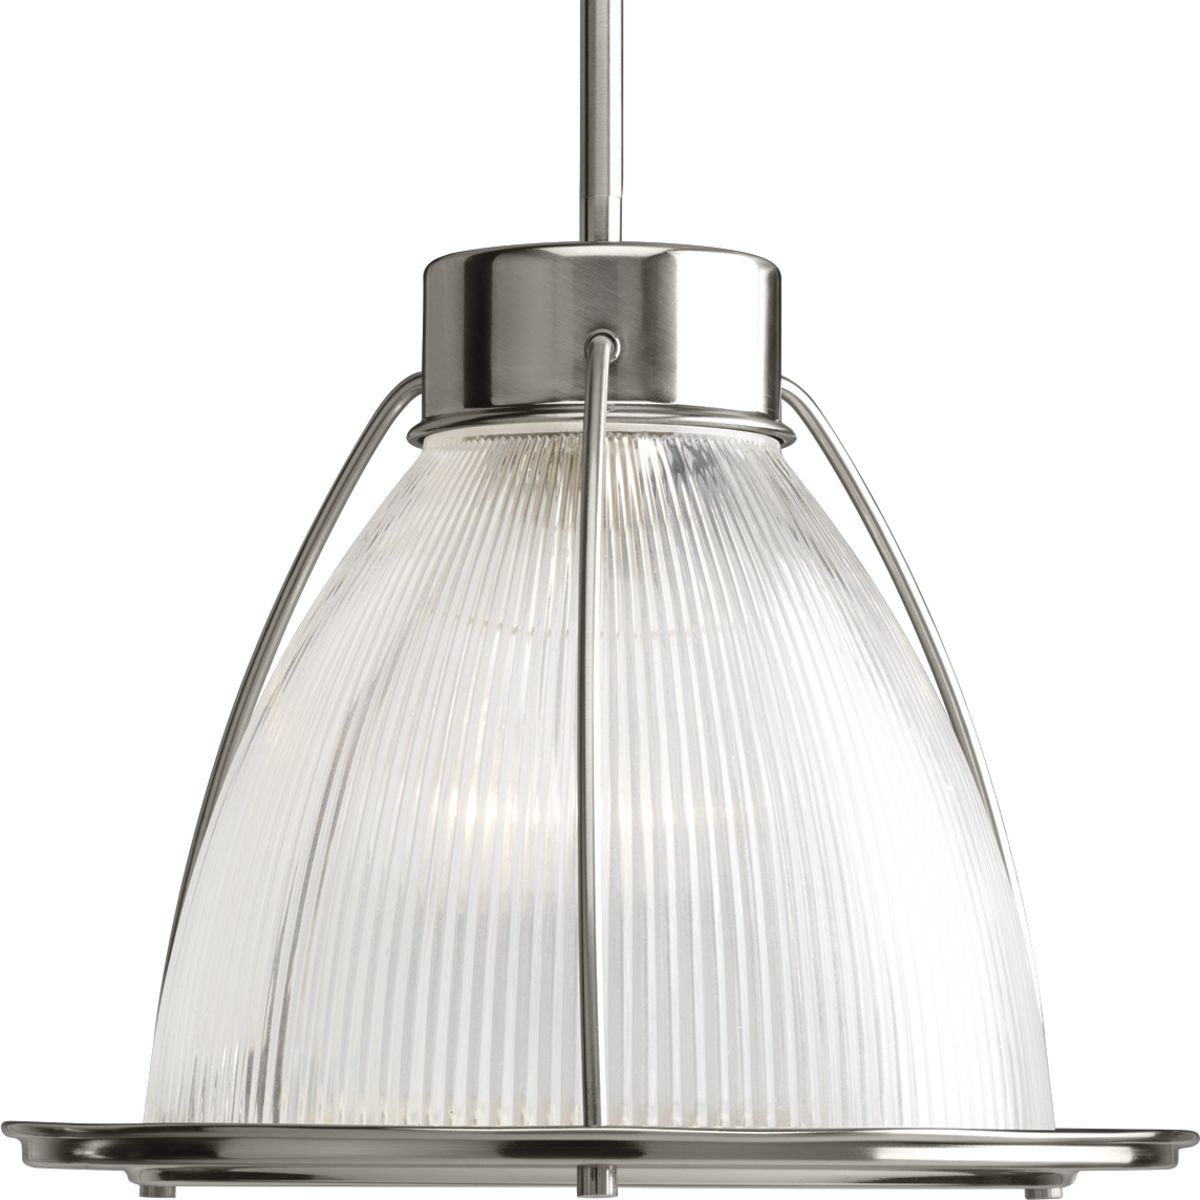 Prismatic Glass Collection One-Light Brushed Nickel Clear Prismatic Glass Coastal Mini-Pendant Light - Dry Location Listed - Model P5183-09